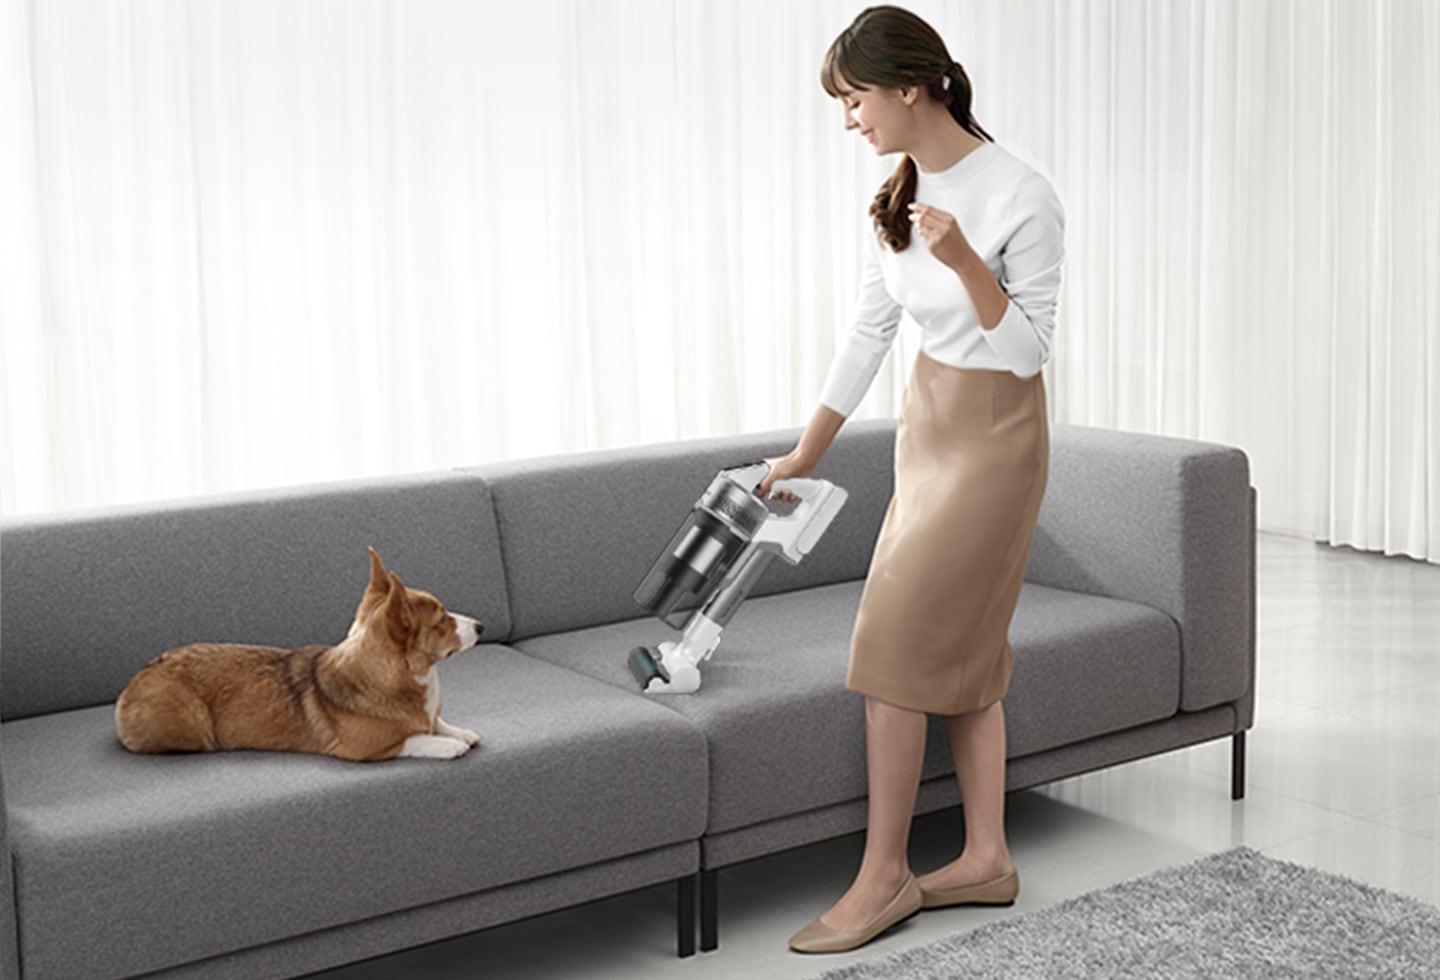 Samsung Jet 70 stick vacuum remove pet hair and keep your home hygienic clean